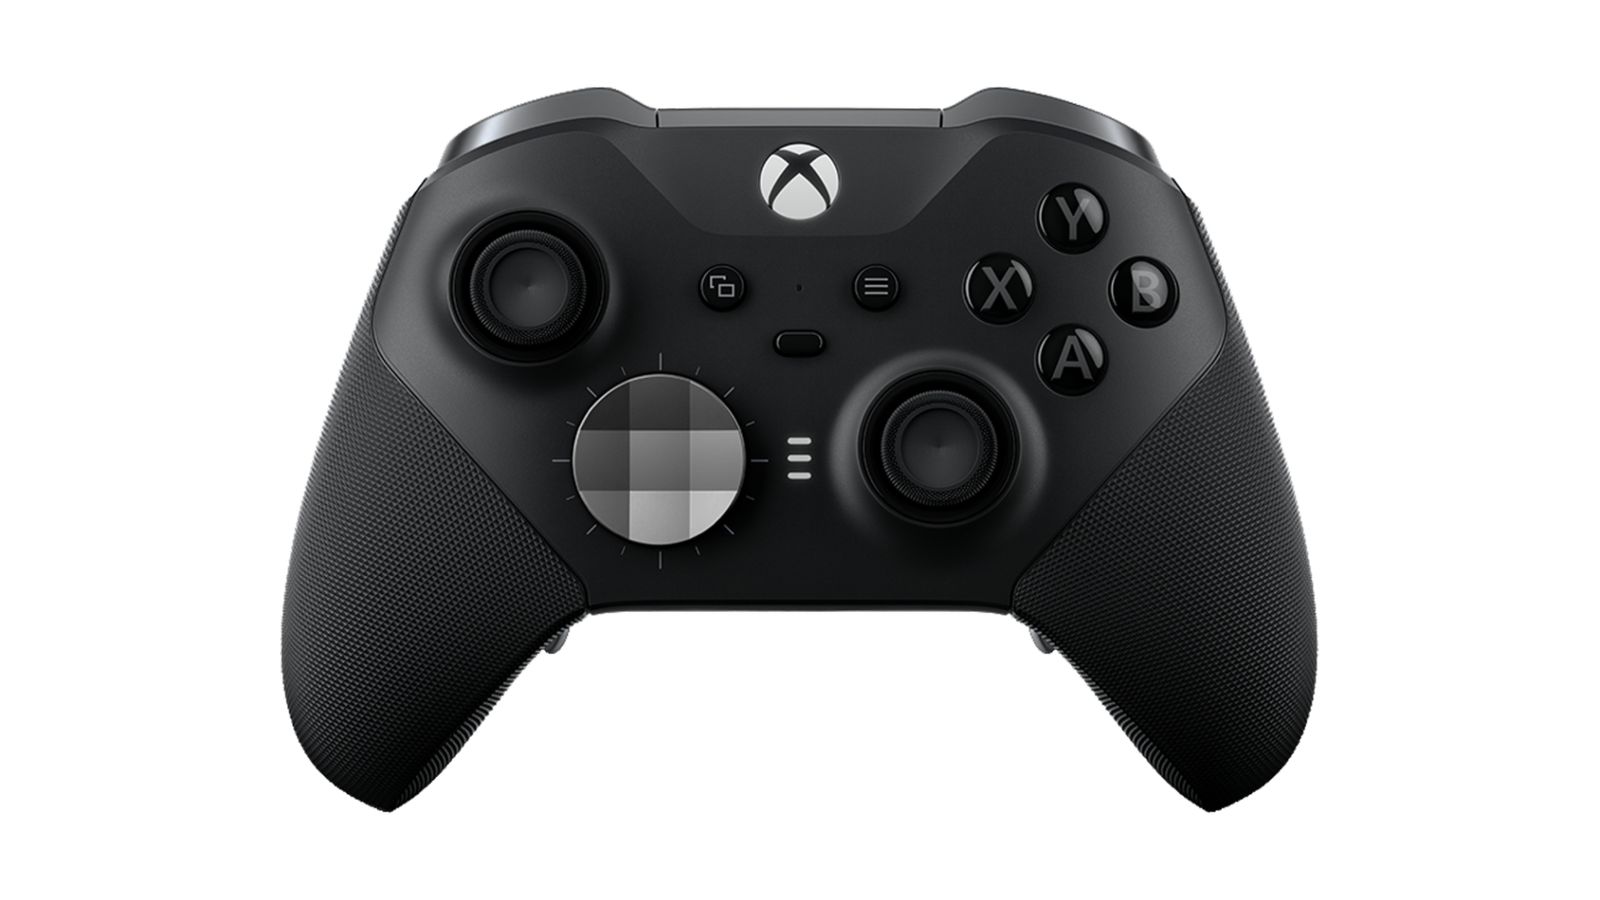 Xbox Elite Series 2 prodcut image of a black Xbox gamepad featuring a white and grey multidirection pad on the left.